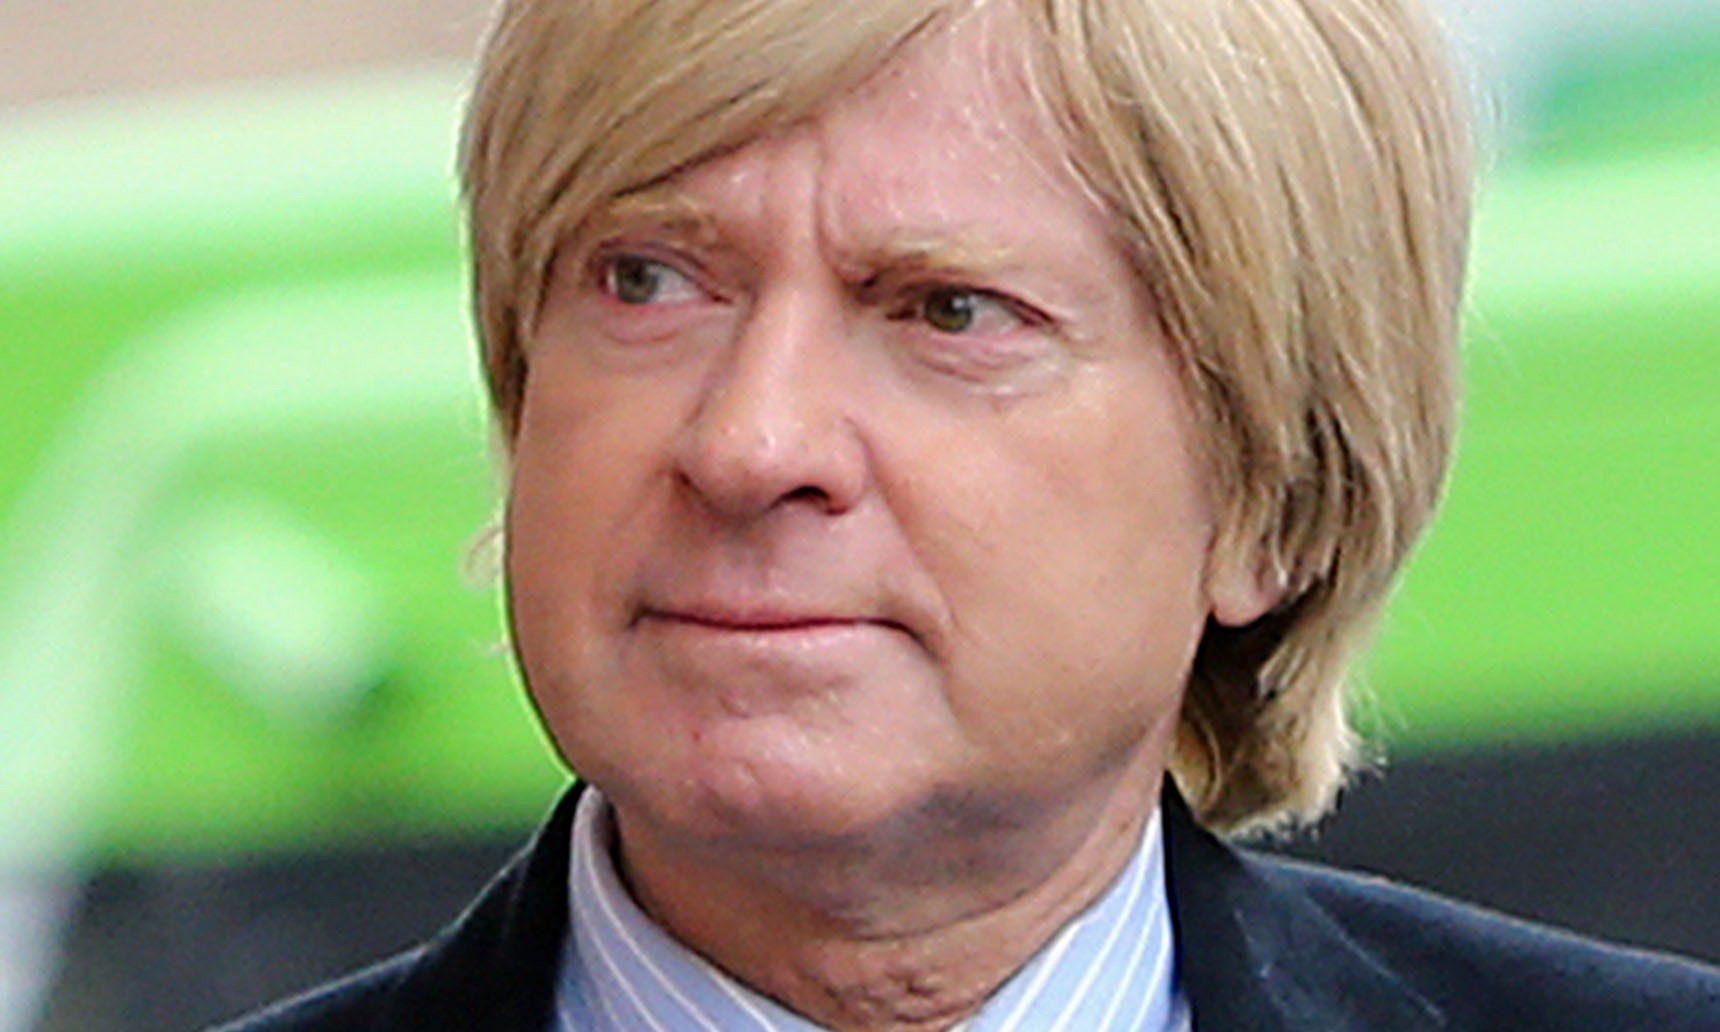 Tory Mp Michael Fabricant Apologises For Tweet Saying He Might Punch